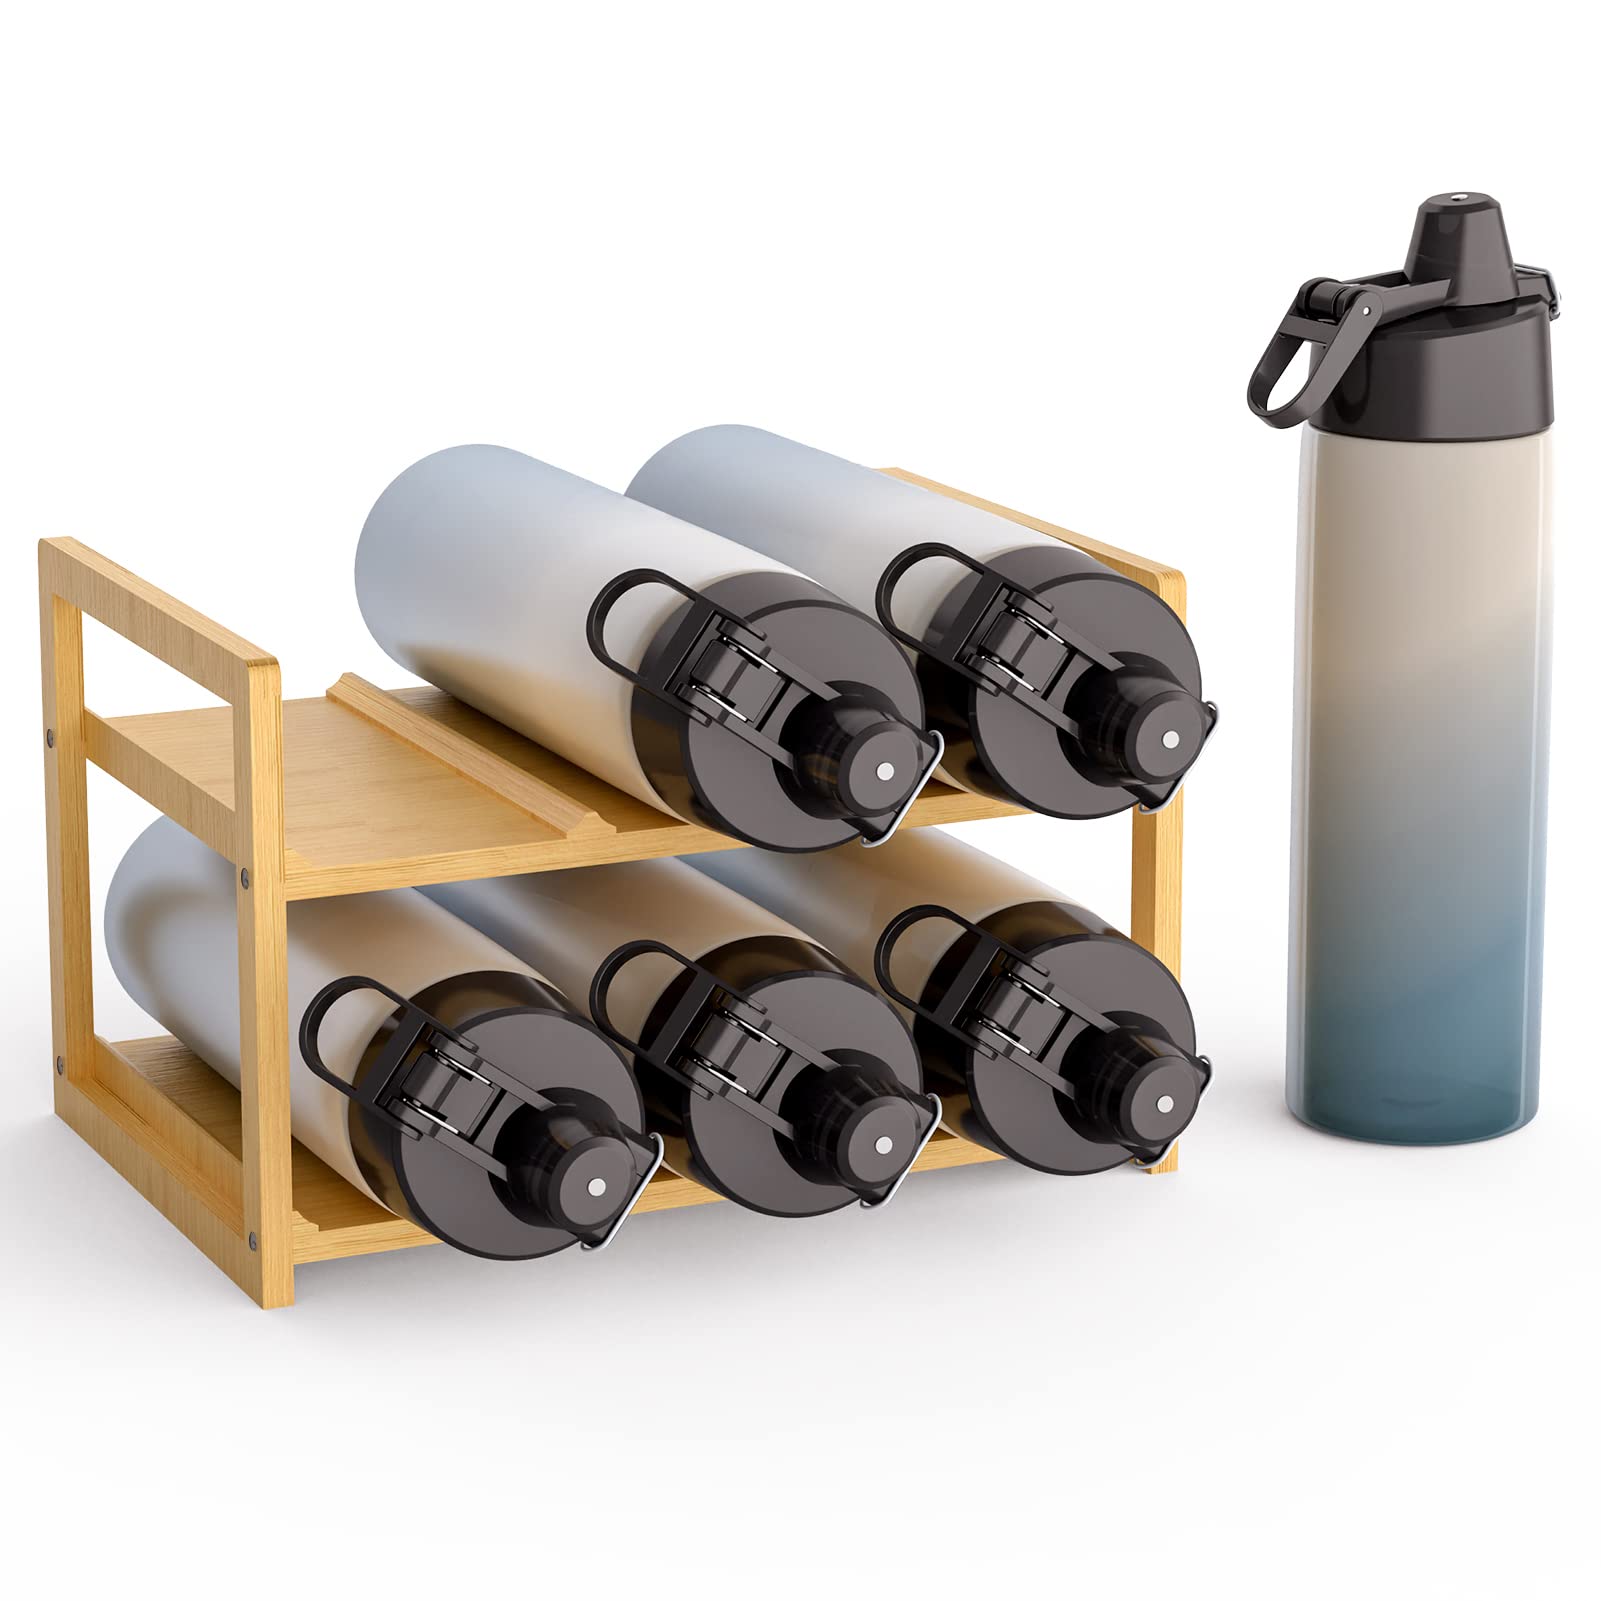 Natural 3-Tier Bamboo Water Bottle Organizer For Cabinet or Pantry